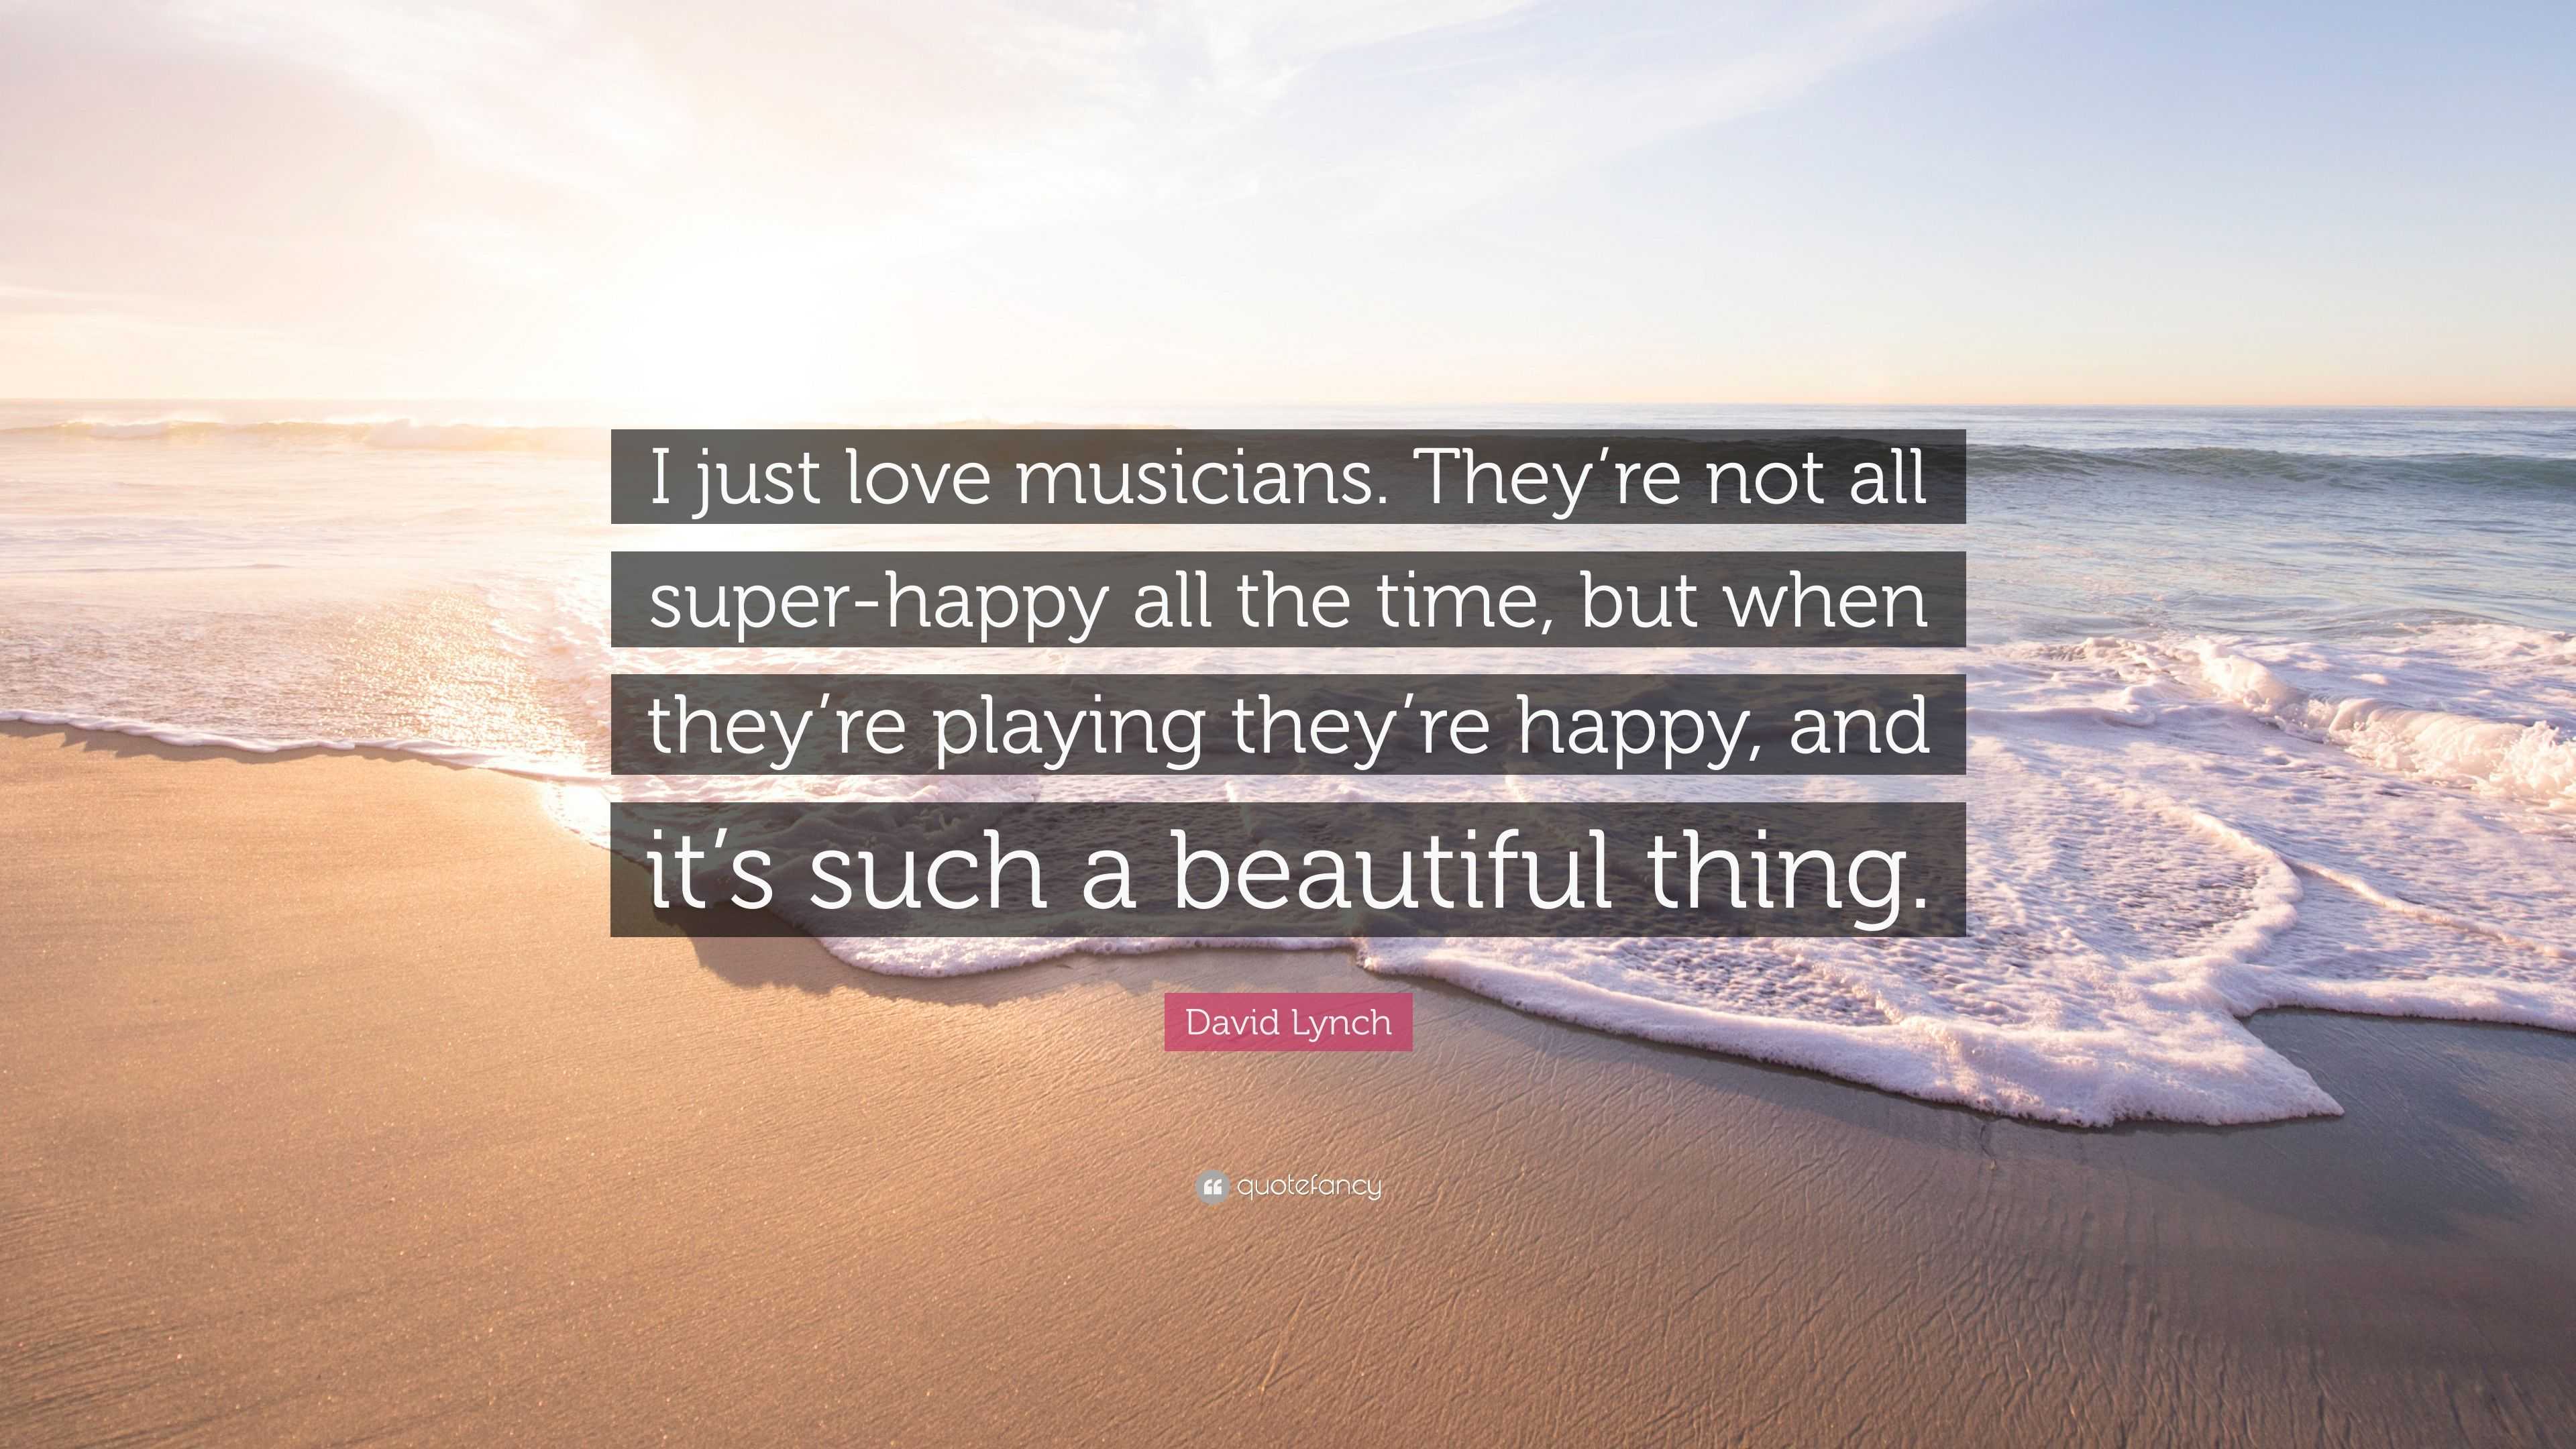 David Lynch Quote “I just love musicians They re not all super